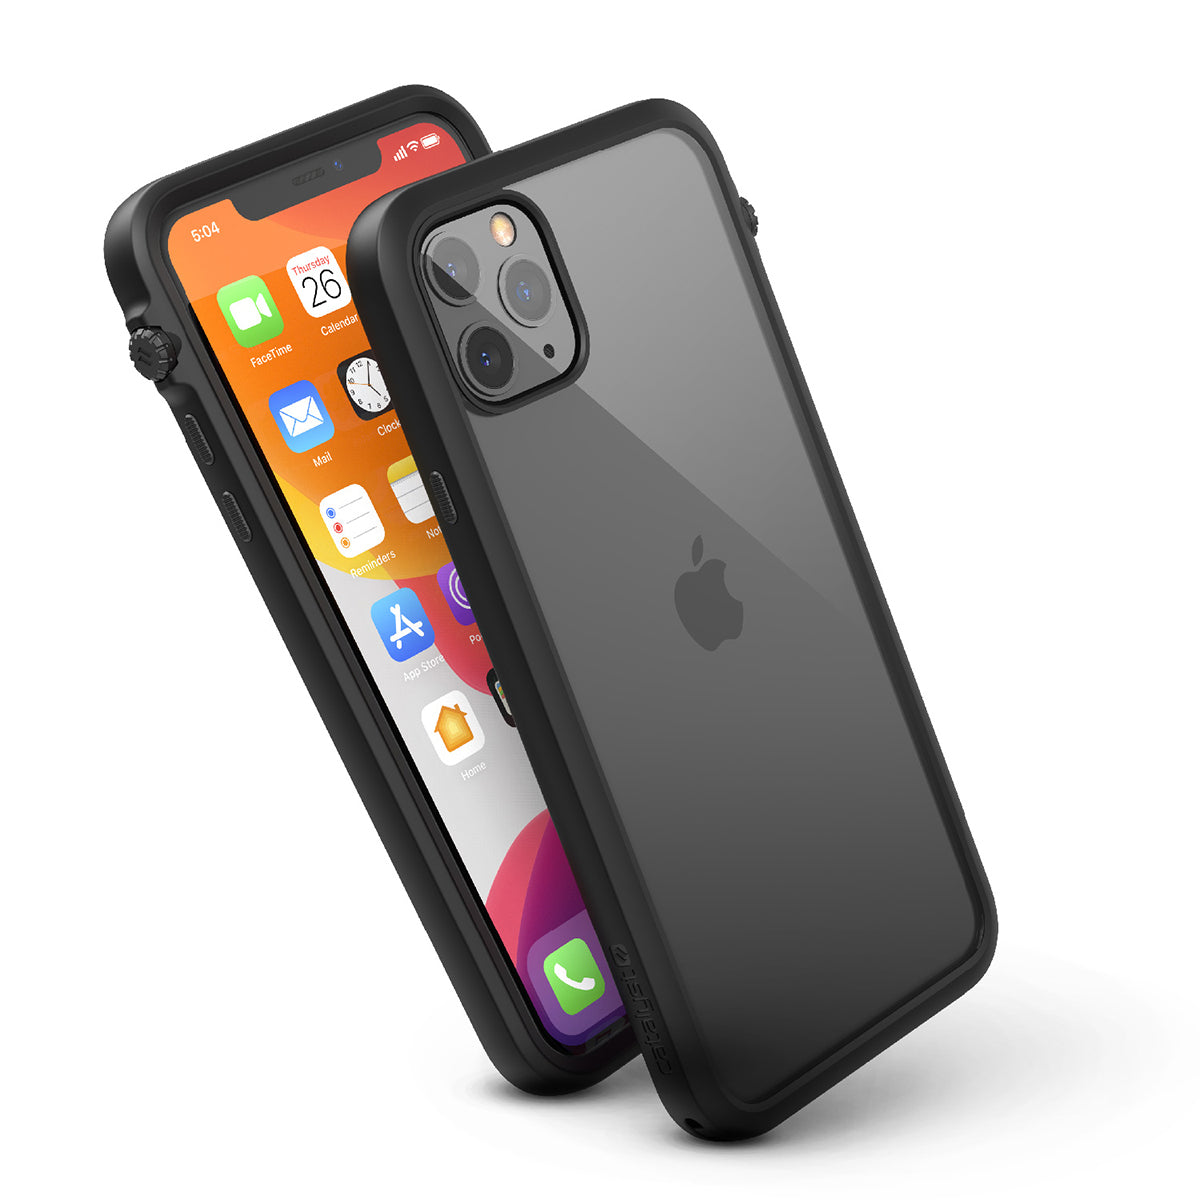 catalyst iPhone 11 series impact protection case stealth blackshowing side views and buttons of the case for iPhone 11 pro max